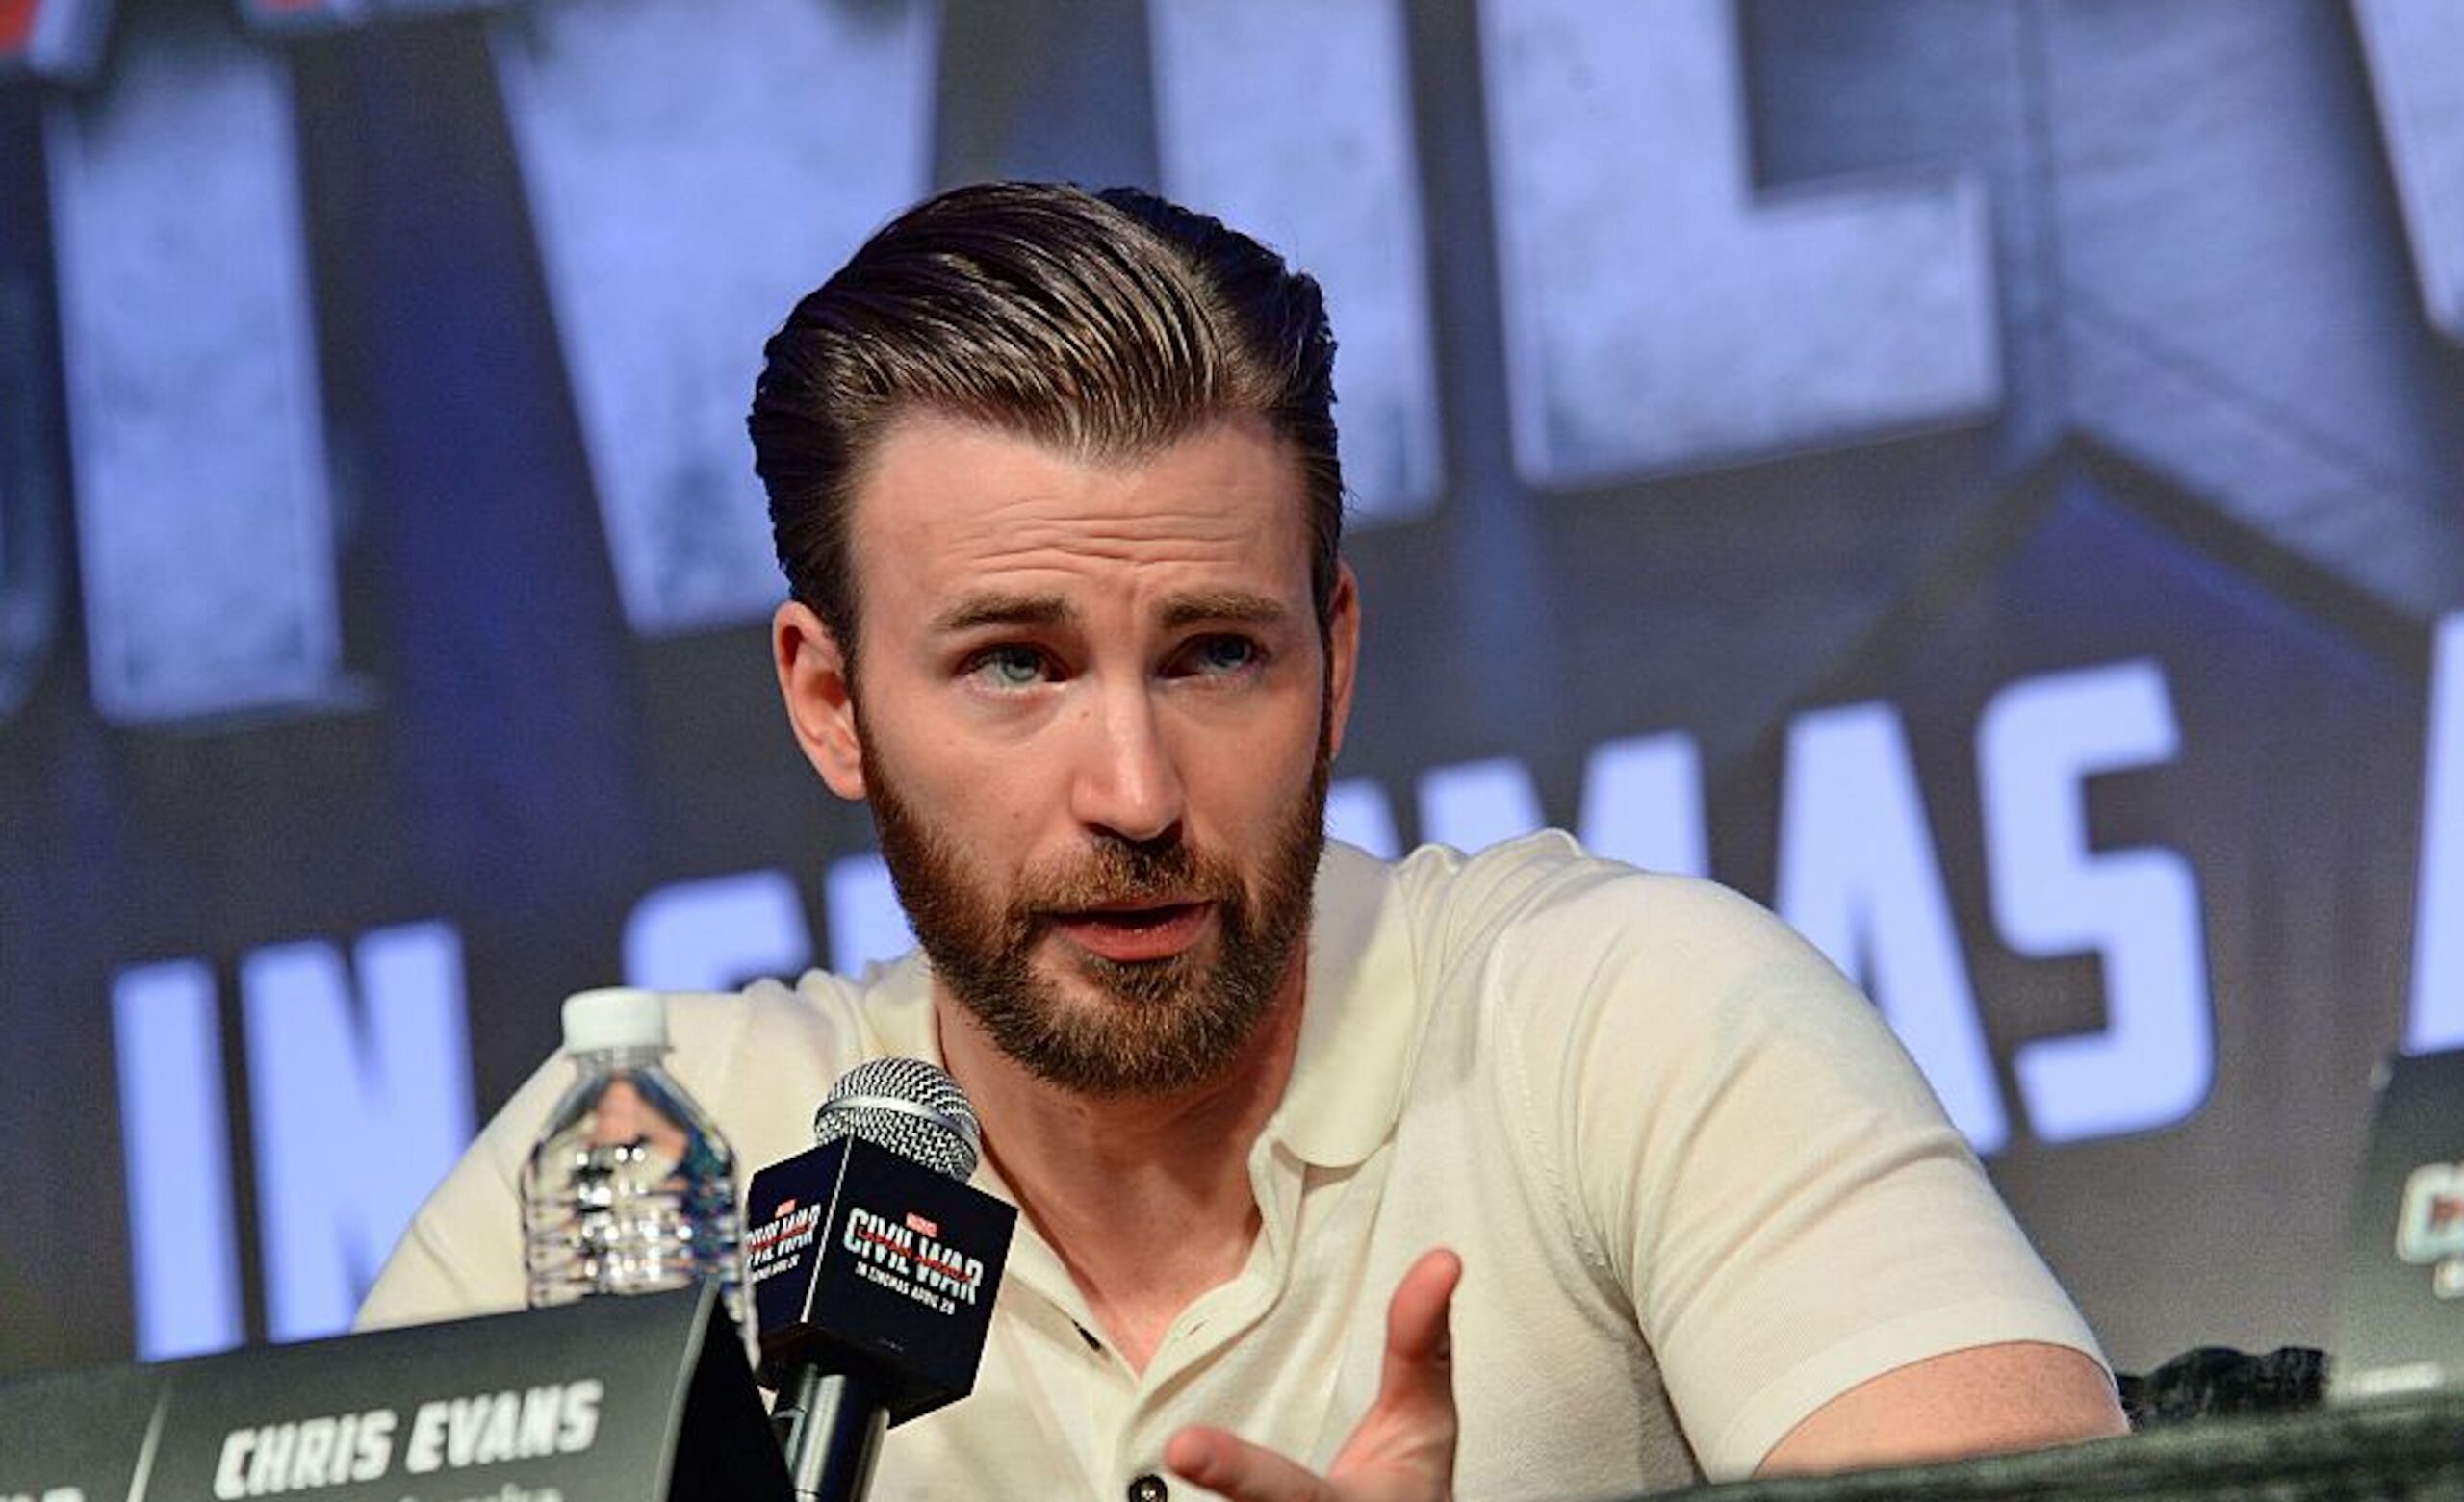 Stargate PeopleAsia - Hollywood heartthrob Chris Evans is changing the  world in his own way. Read more about him and other inspiring individuals  in PeopleAsia's April-May 2021 issue, featuring Chris on one